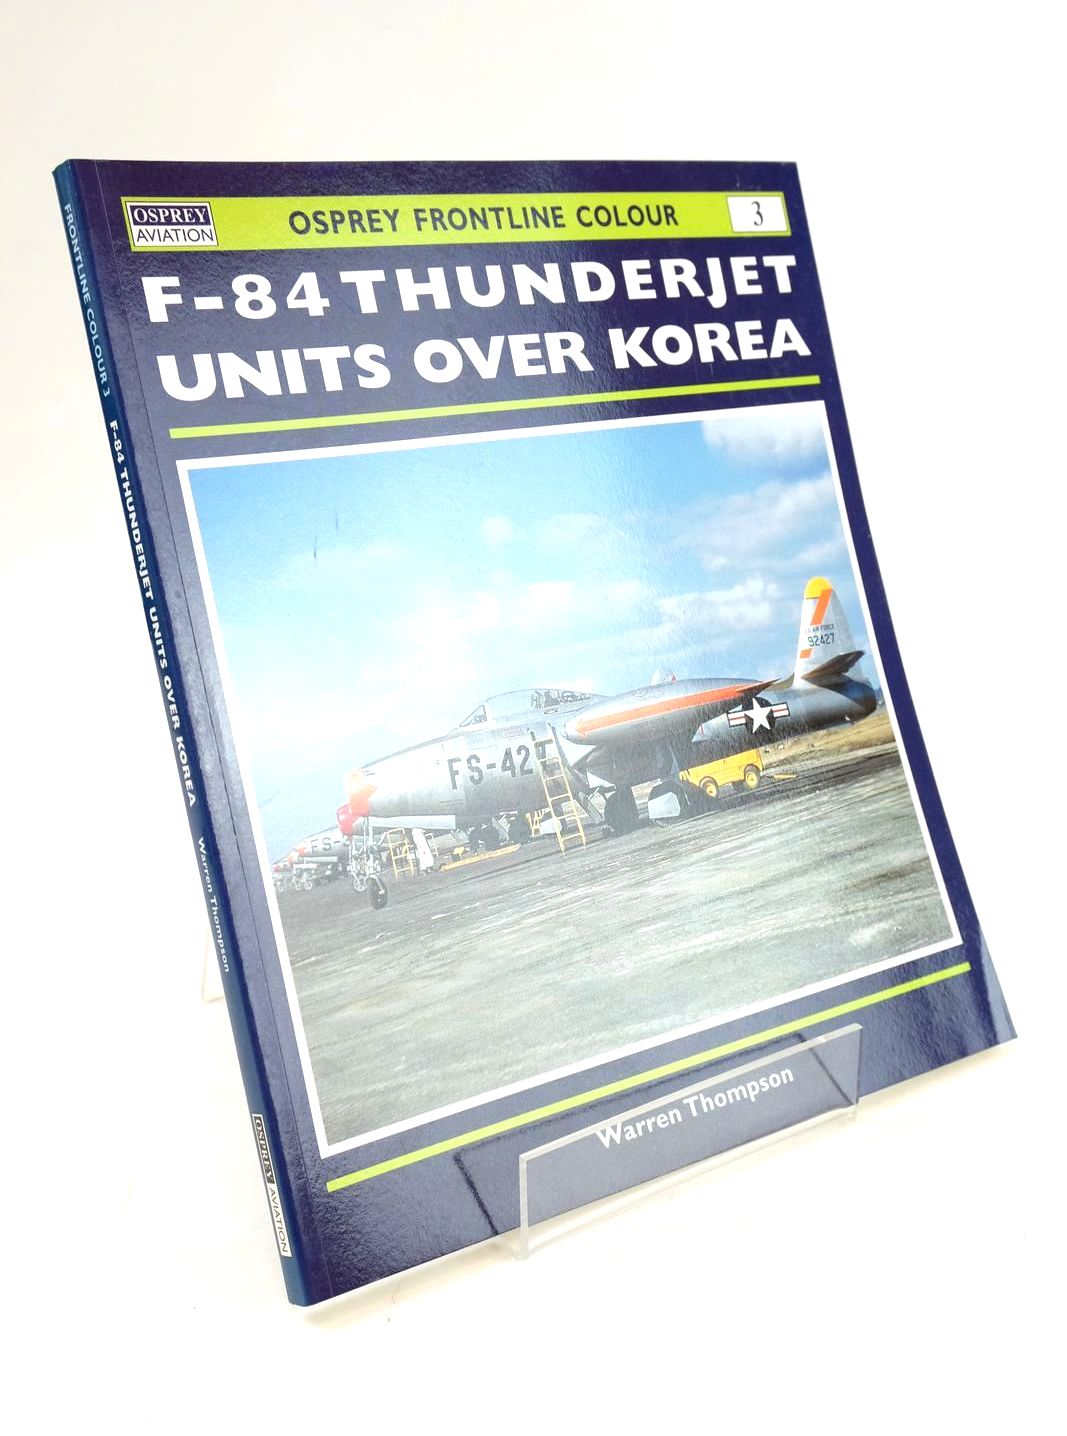 Photo of F-84 THUNDERJET UNITS OVER KOREA written by Thompson, Warren published by Osprey Aviation (STOCK CODE: 1325162)  for sale by Stella & Rose's Books